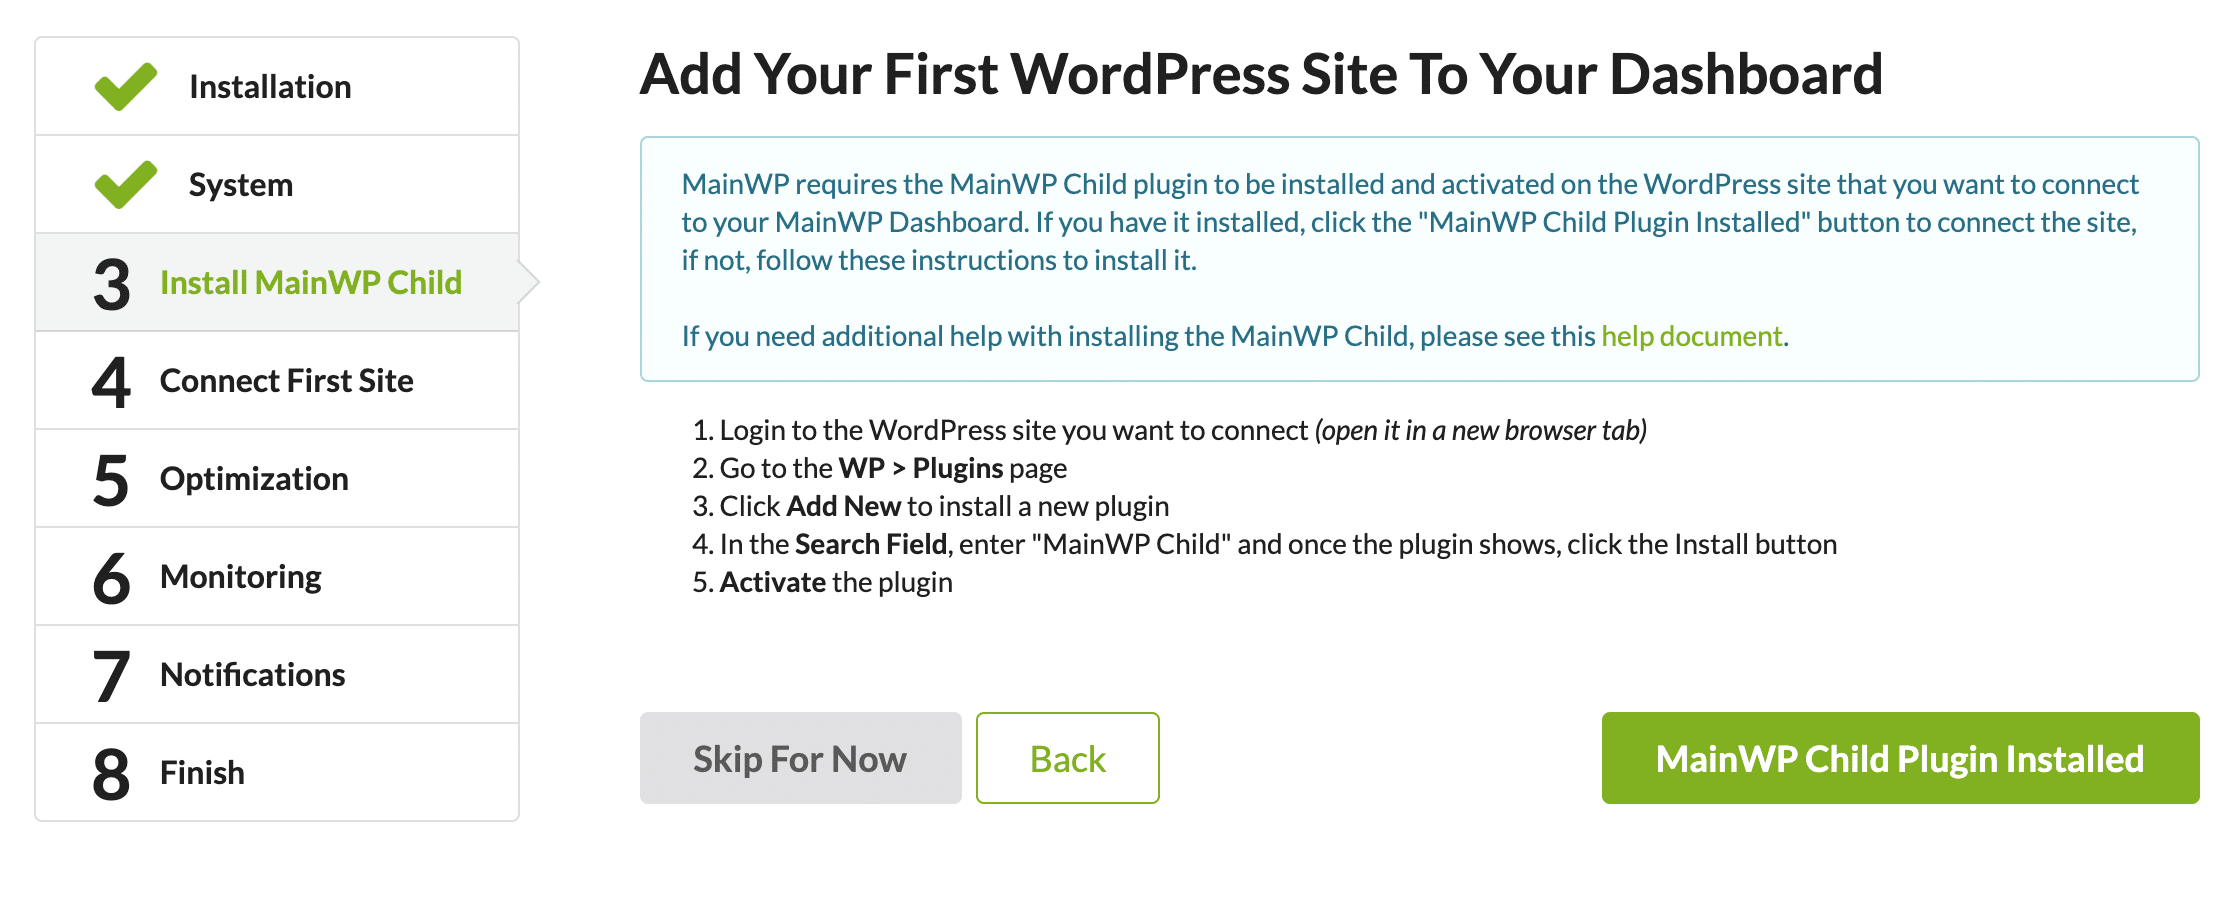 Add Your First WordPress Site To Your Dashboard